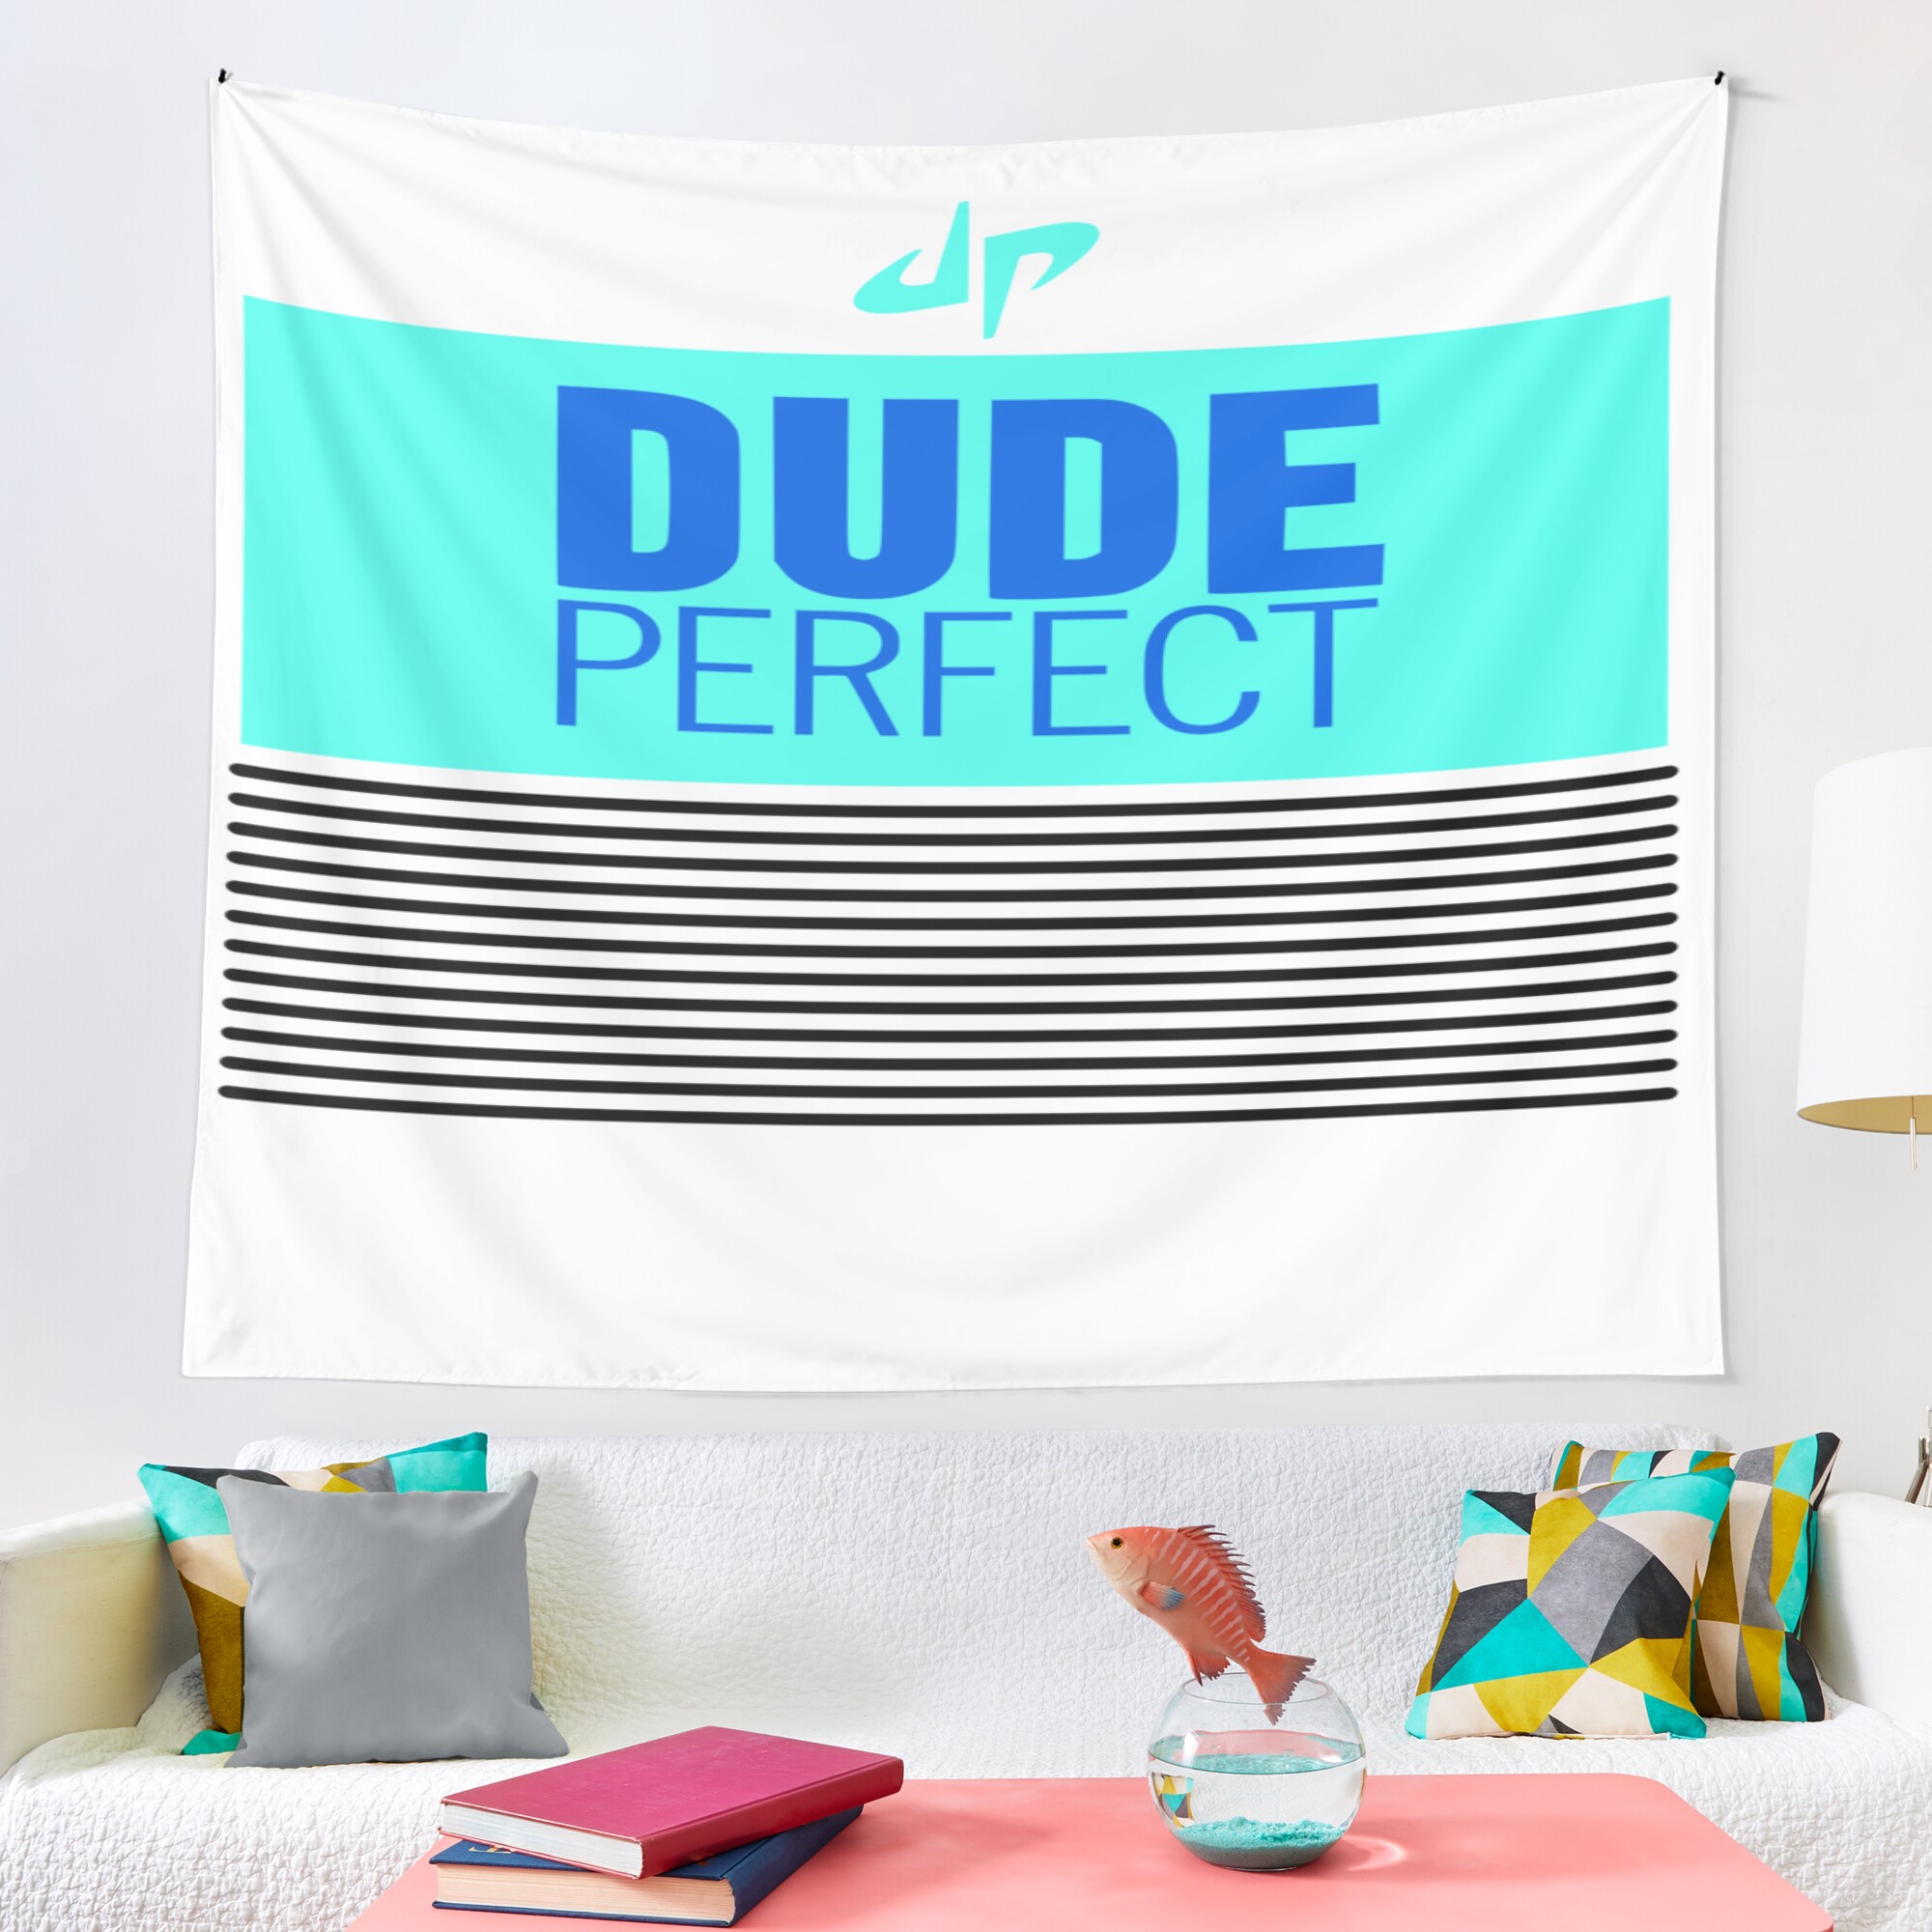 urtapestry lifestyle largesquare2000x2000 8 - Dude Perfect Merch